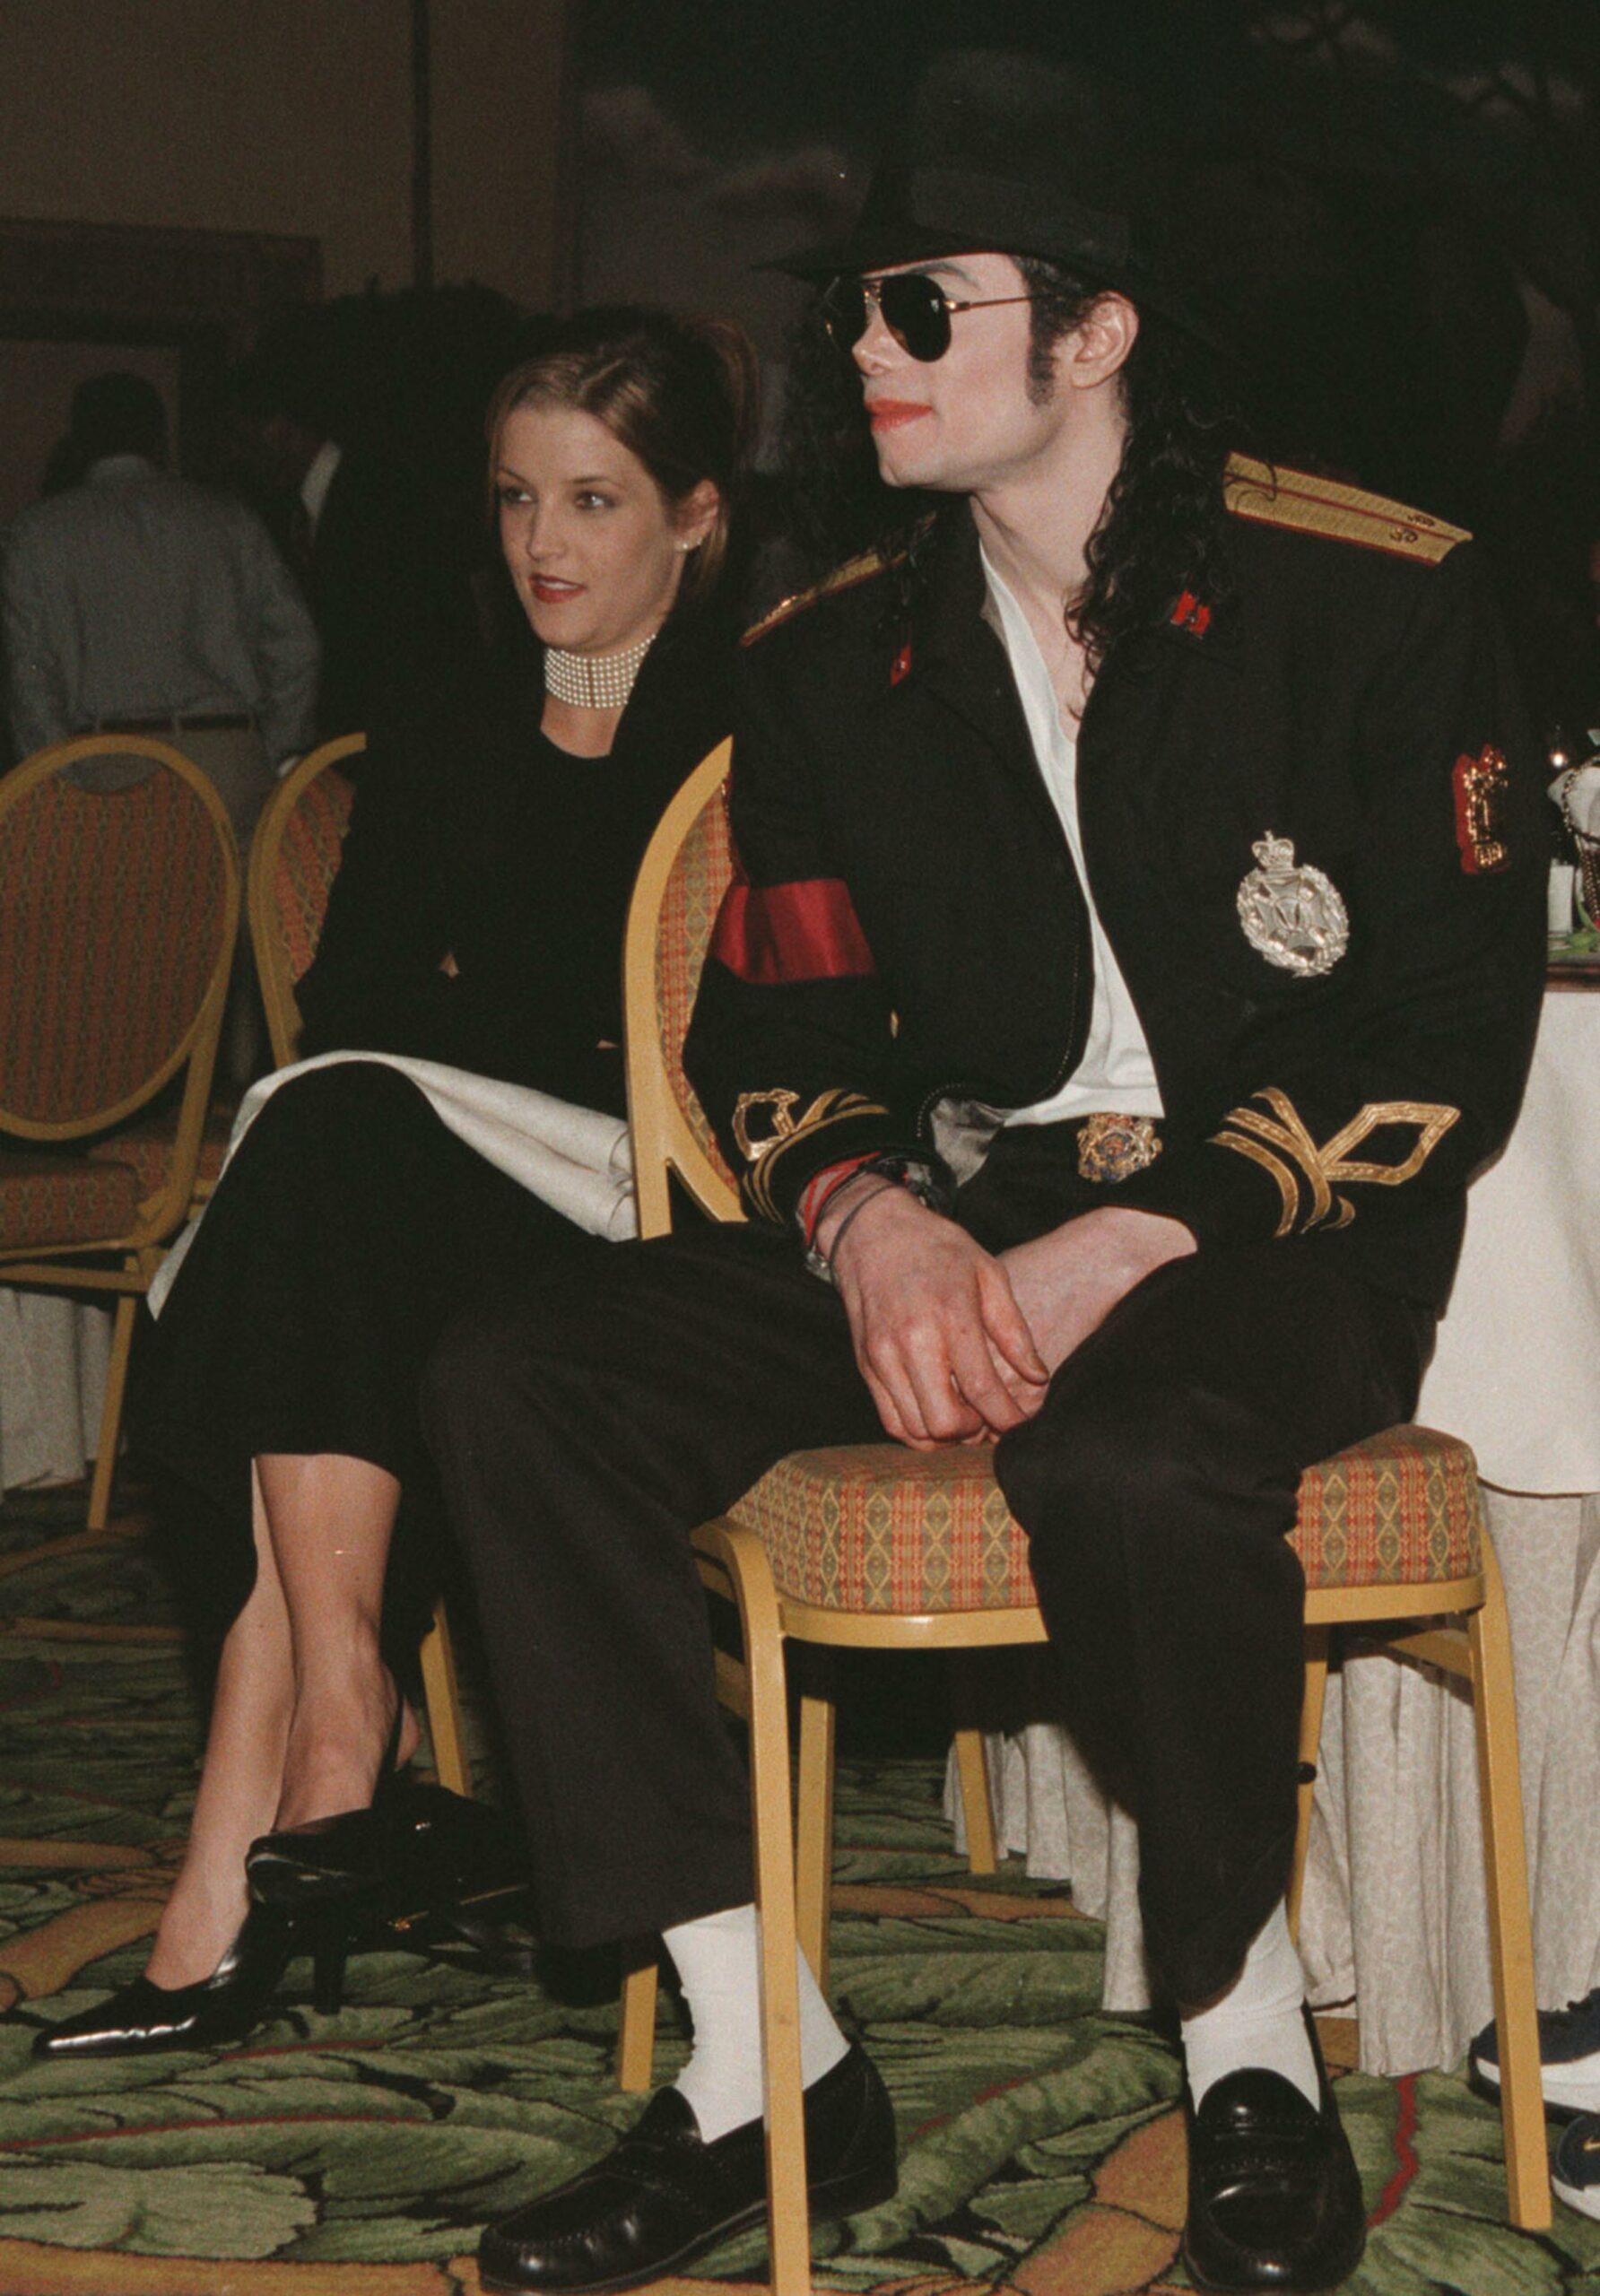 Lisa Marie Presley and Michael Jackson at a private function in Sun CitySun City, South Africa